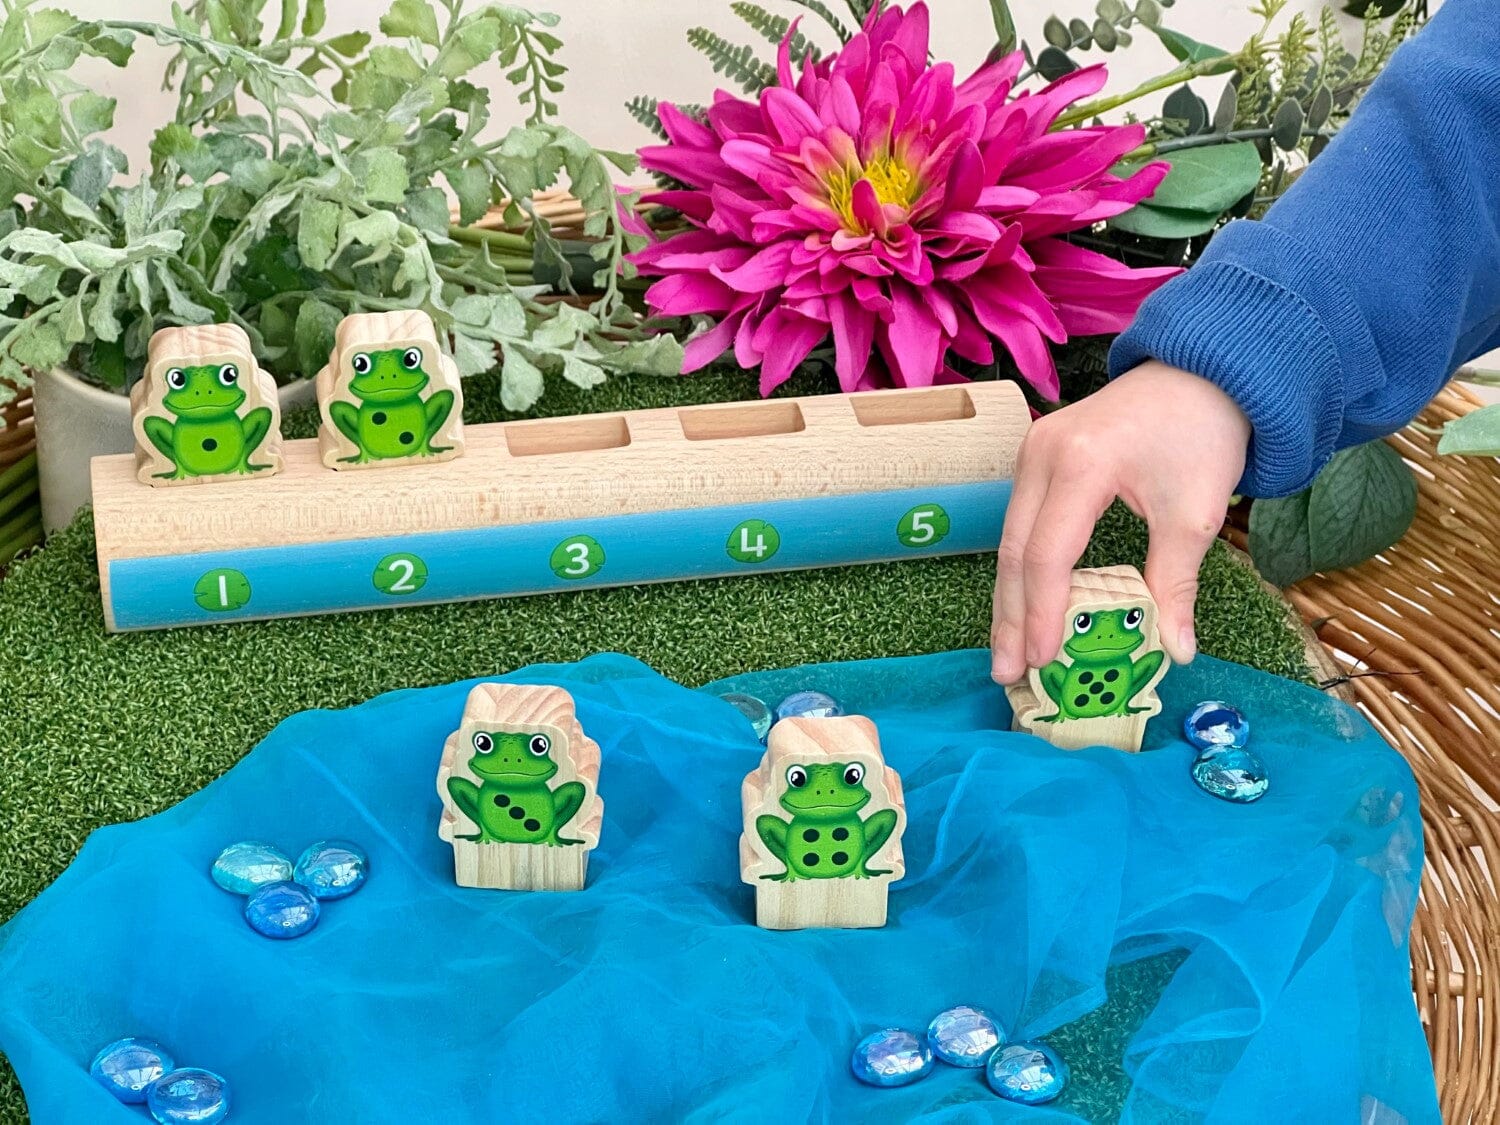 Five Frog on a Log toys Louise Kool & Galt for child care day care primary classrooms